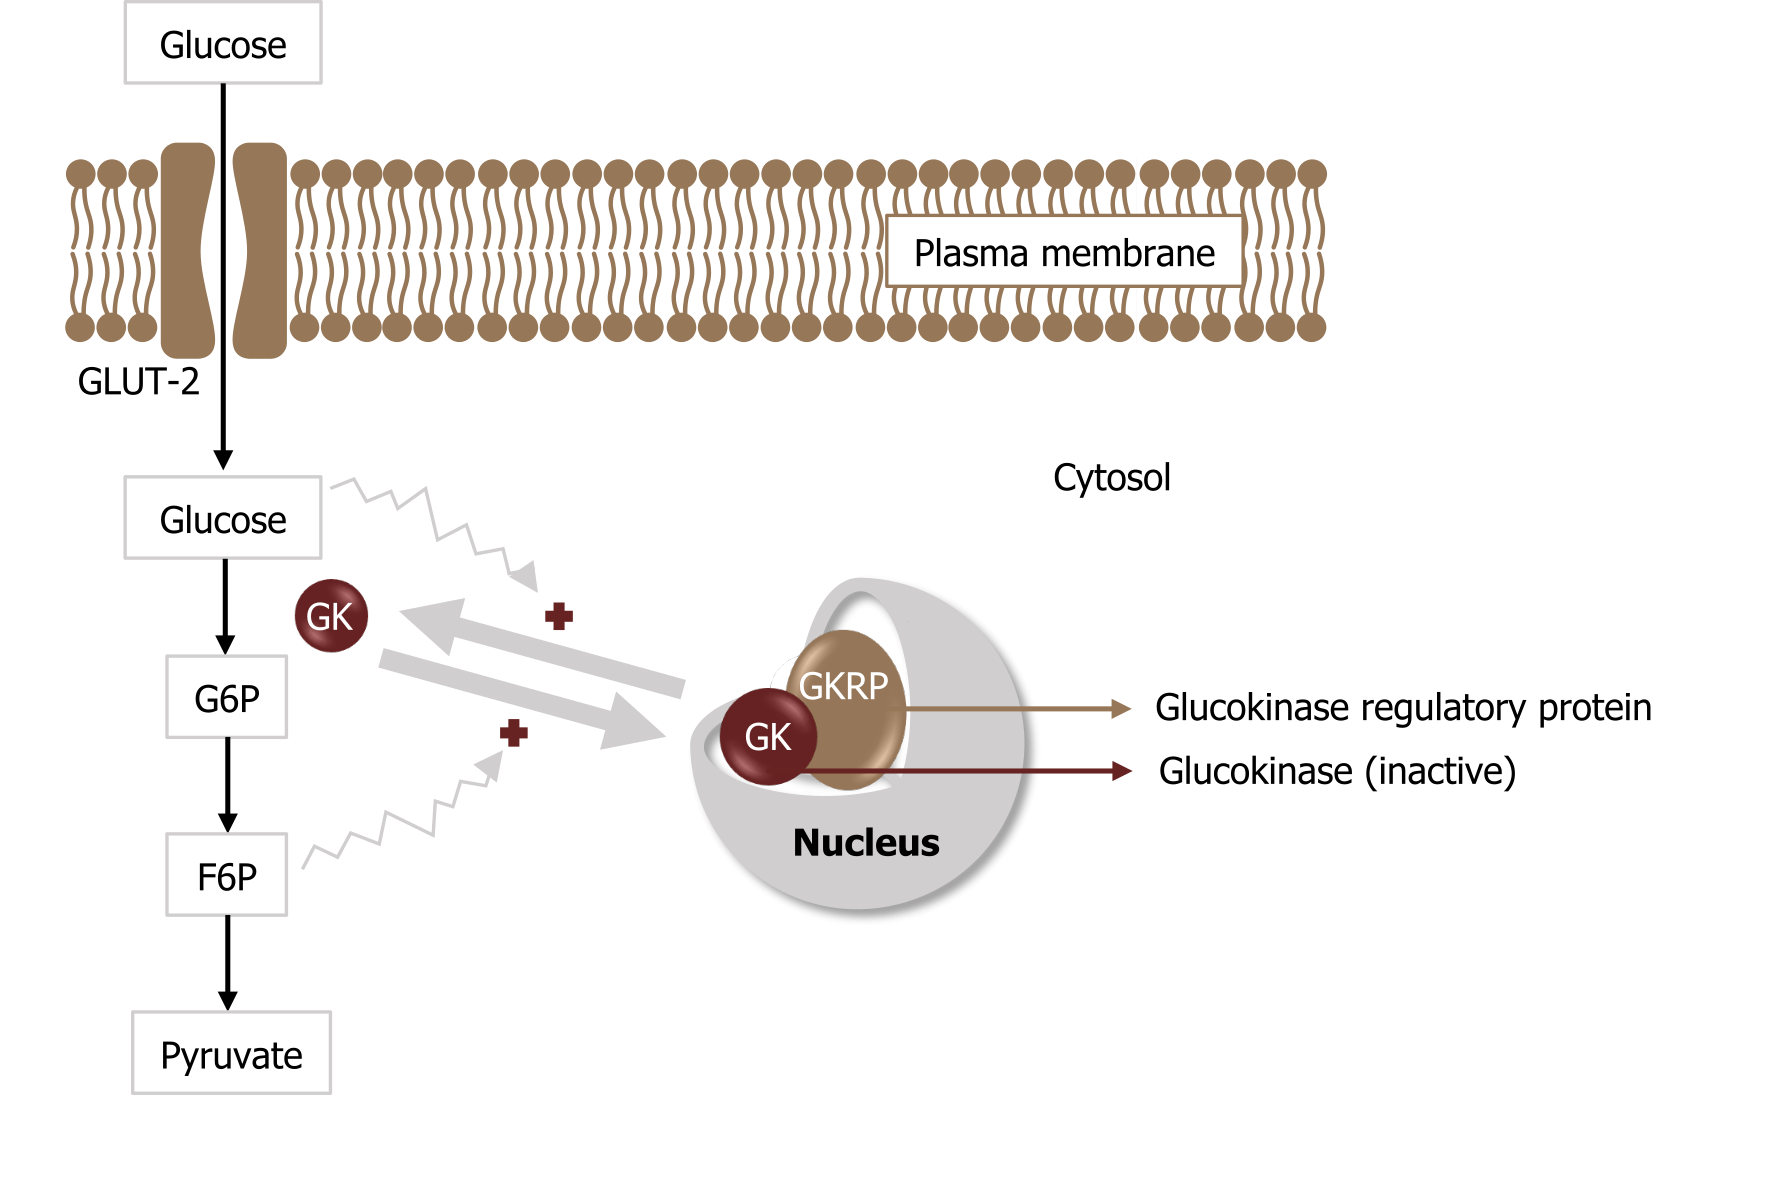 Glucose passes through the plasma membrane through the GLUT-2 channel. In the cytosol, glucose arrow G6P arrow F6P arrow pyruvate. Glucokinase (inactive) and Glucokinase regulatory protein pictured in a nucleus with bidirectional arrows pointing to free GK in between glucose and G6P. Glucose activates the reaction from bound to free GK and F6P activates the reaction from free to bound GK.